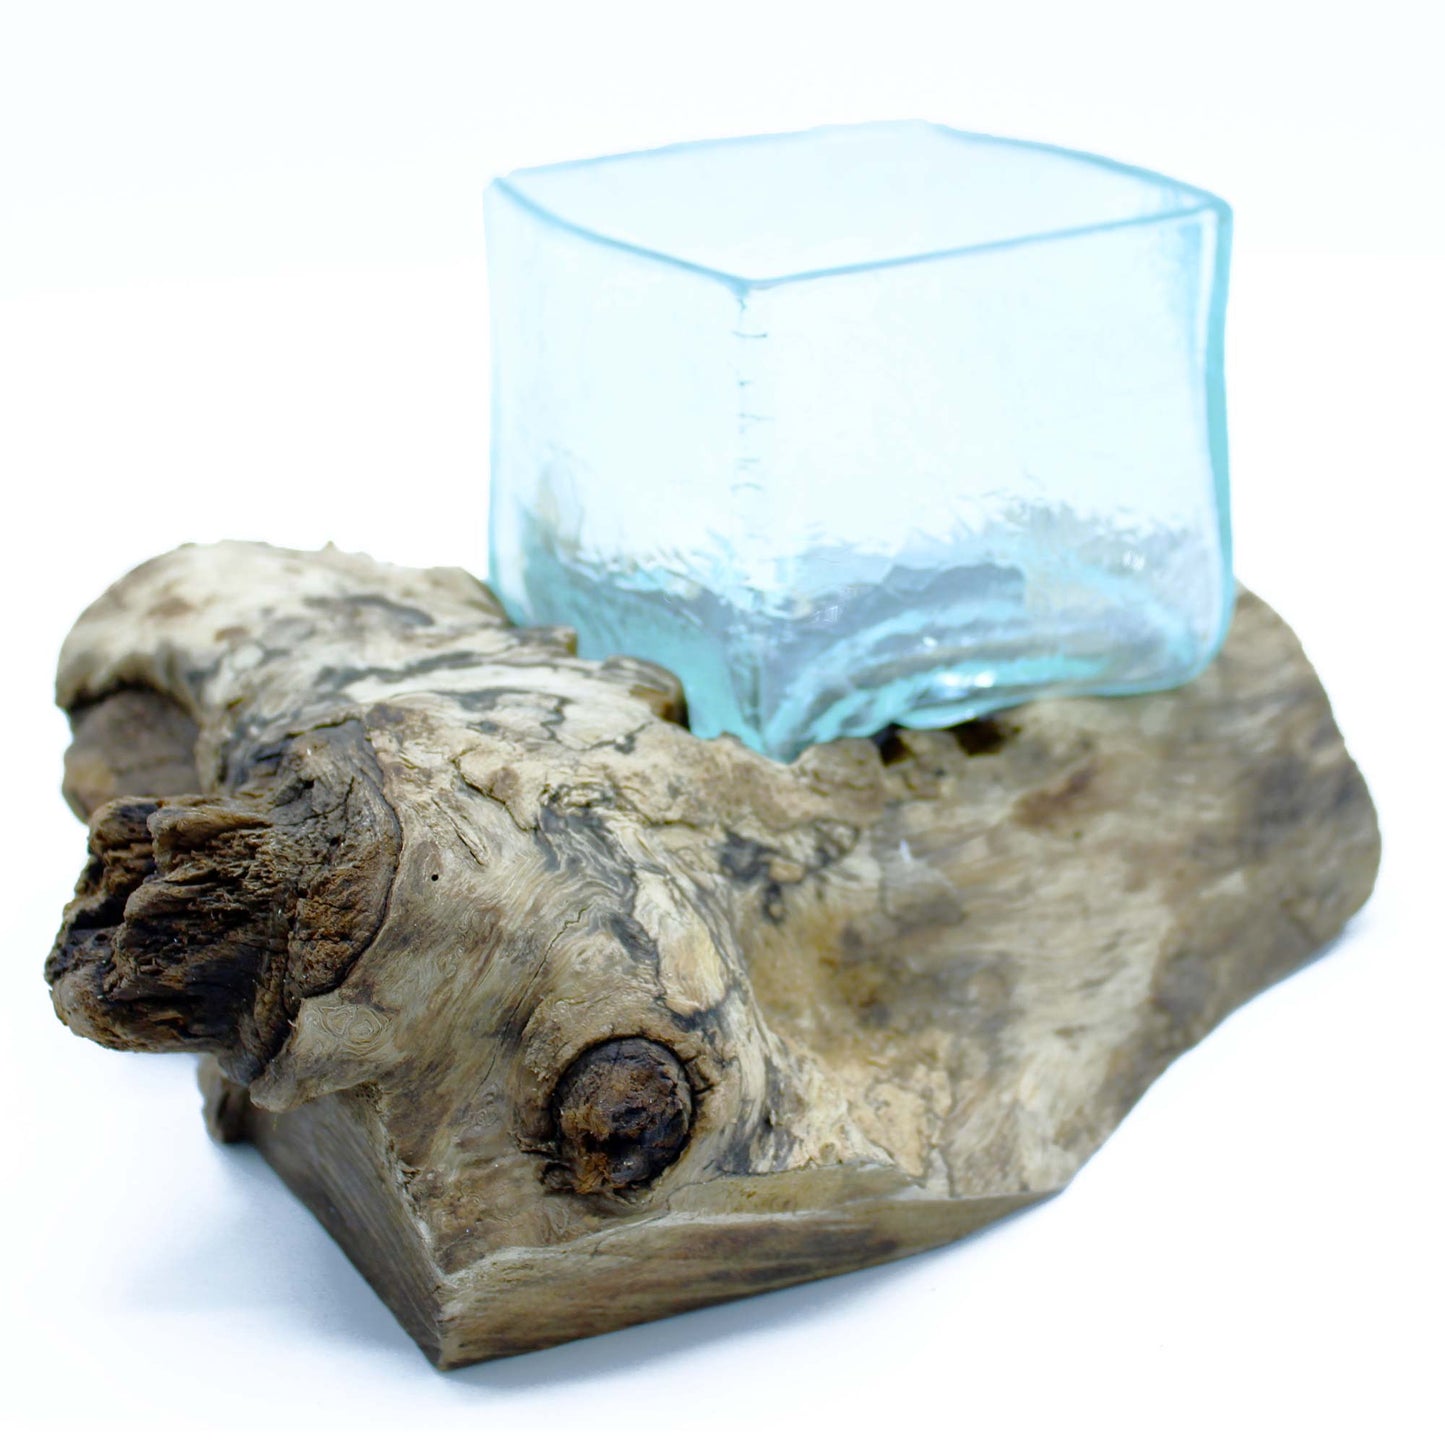 Molten Crackled Glass Tank on Wood